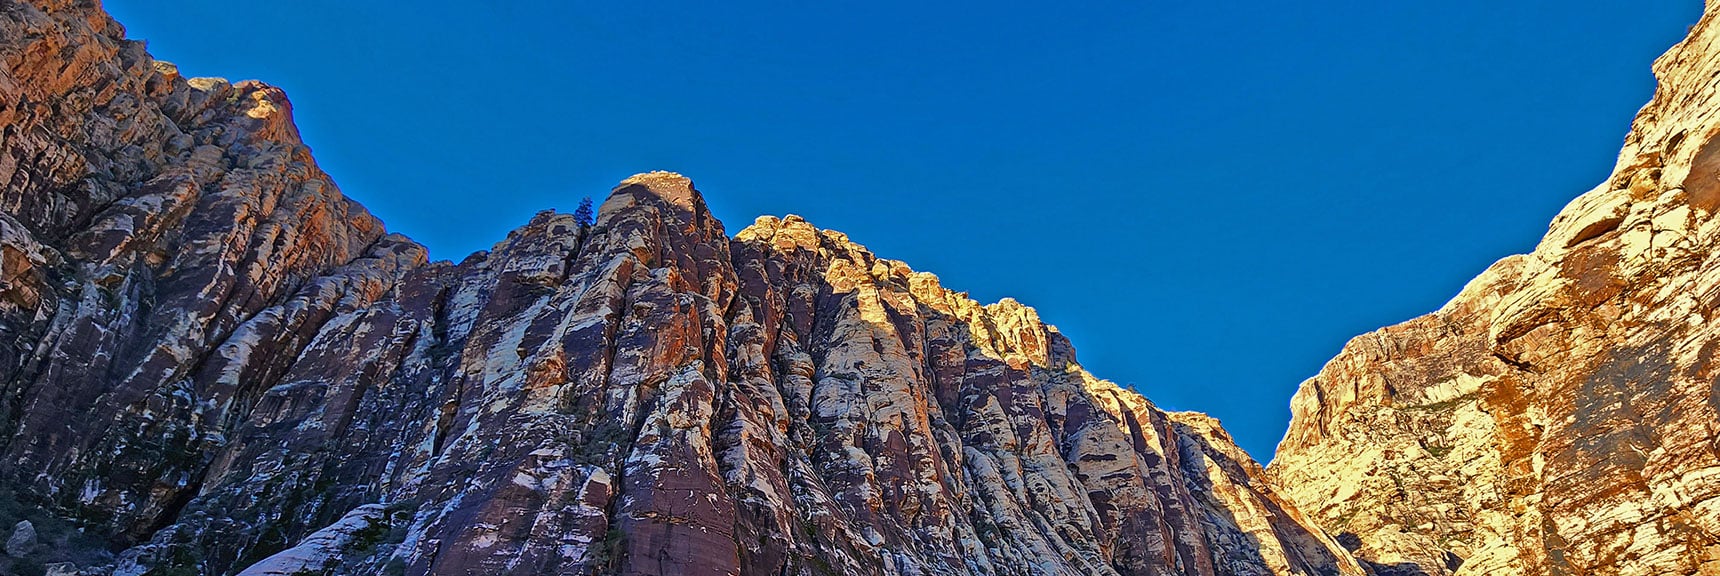 Towering Cliffs on South Side of Canyon Opening | Ice Box Canyon | Red Rock Canyon NCA, Nevada | Las Vegas Area Trails | David Smith